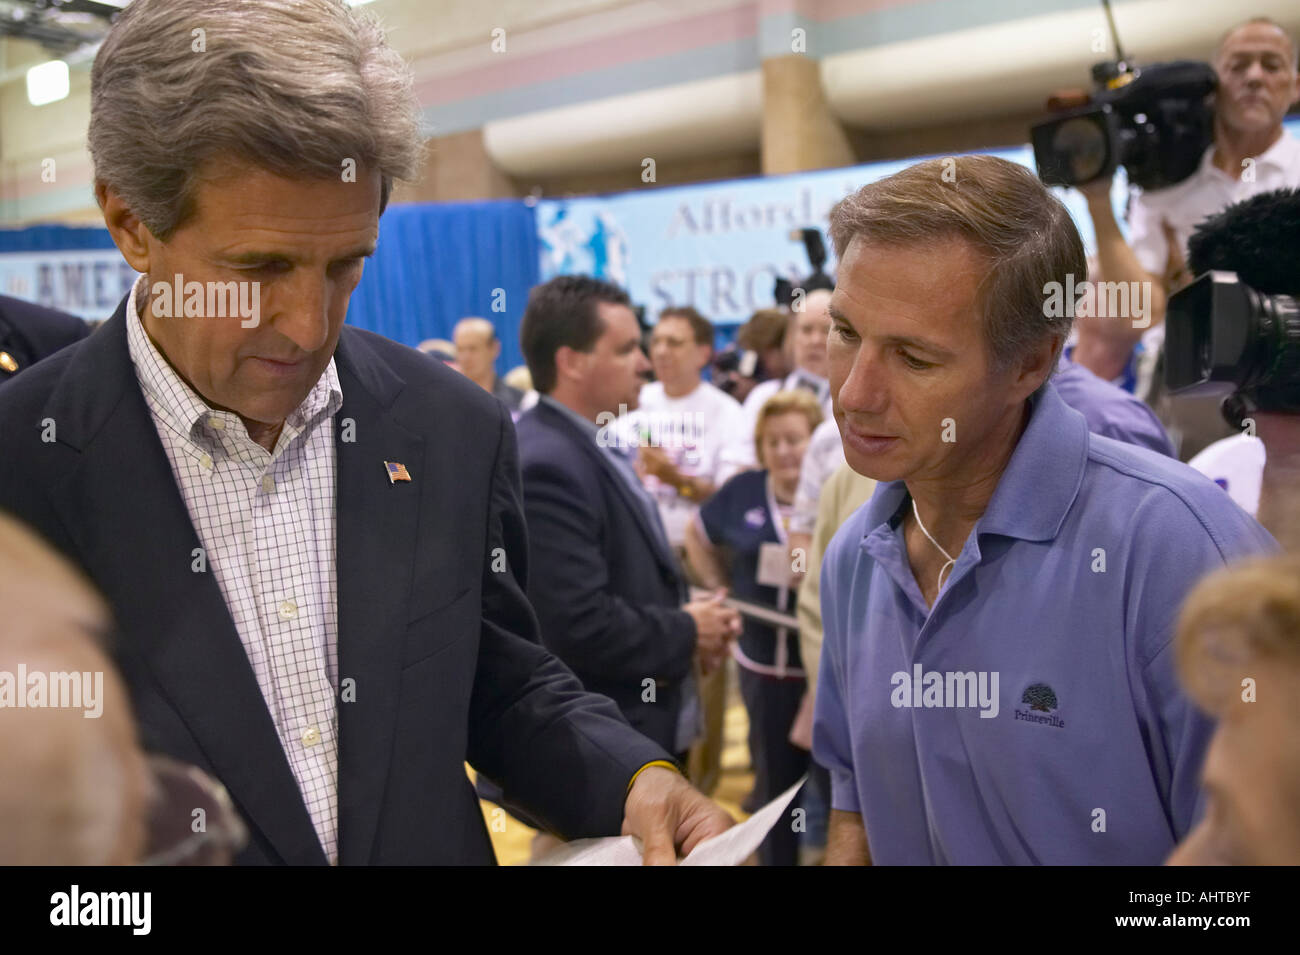 Senator John Kerry interacting with attendees at the Valley View Rec Center Henderson NV Stock Photo